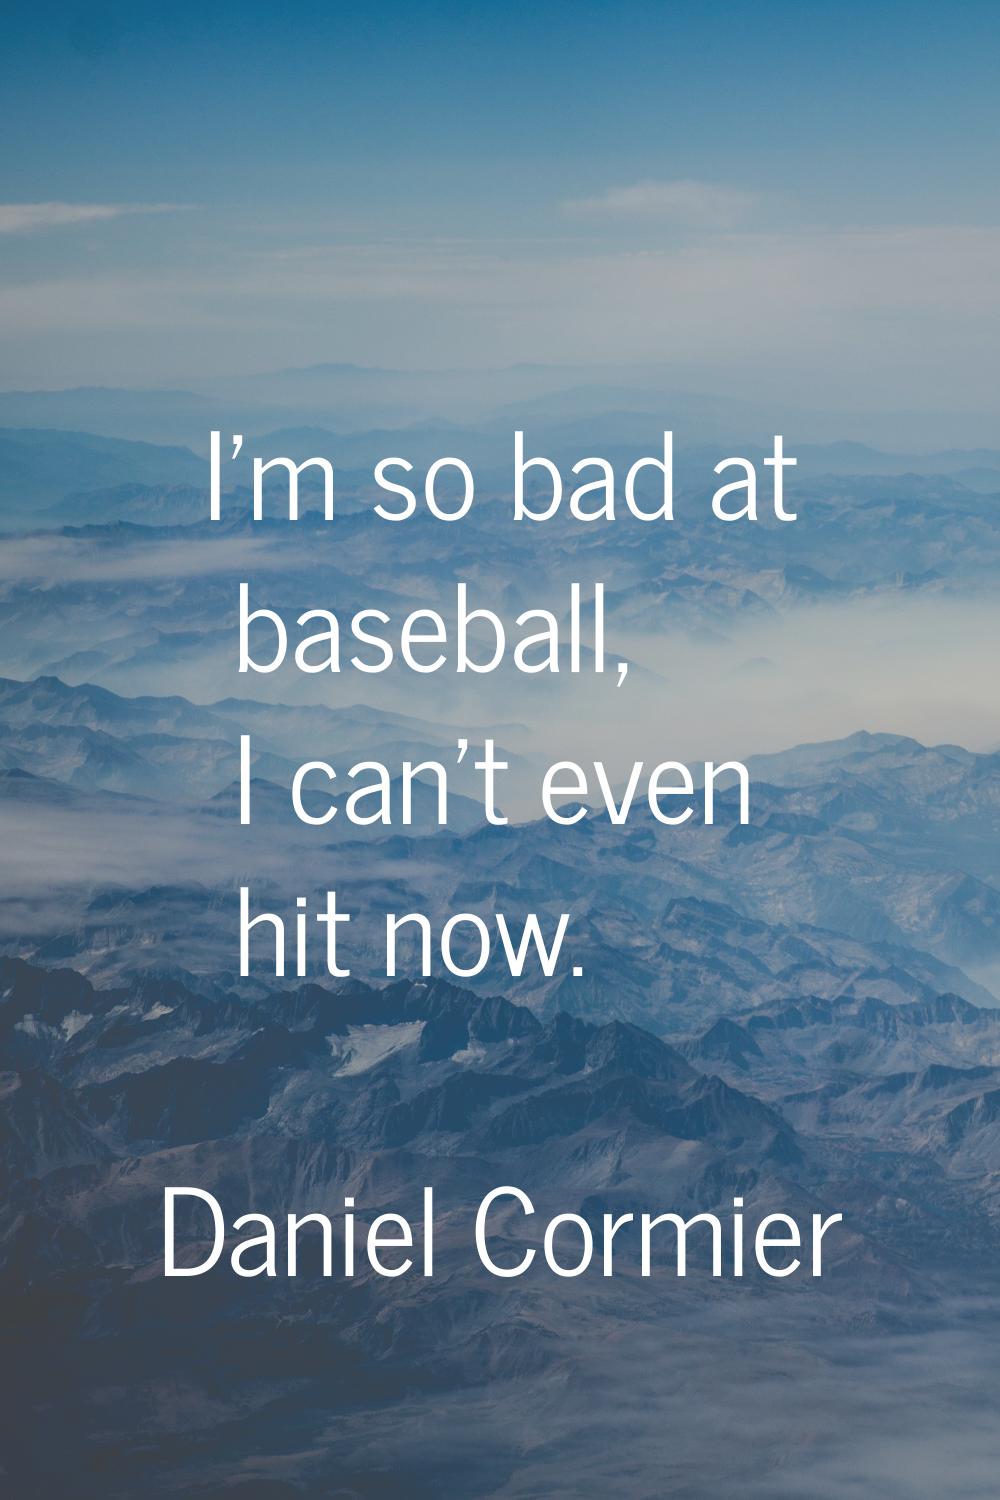 I'm so bad at baseball, I can't even hit now.